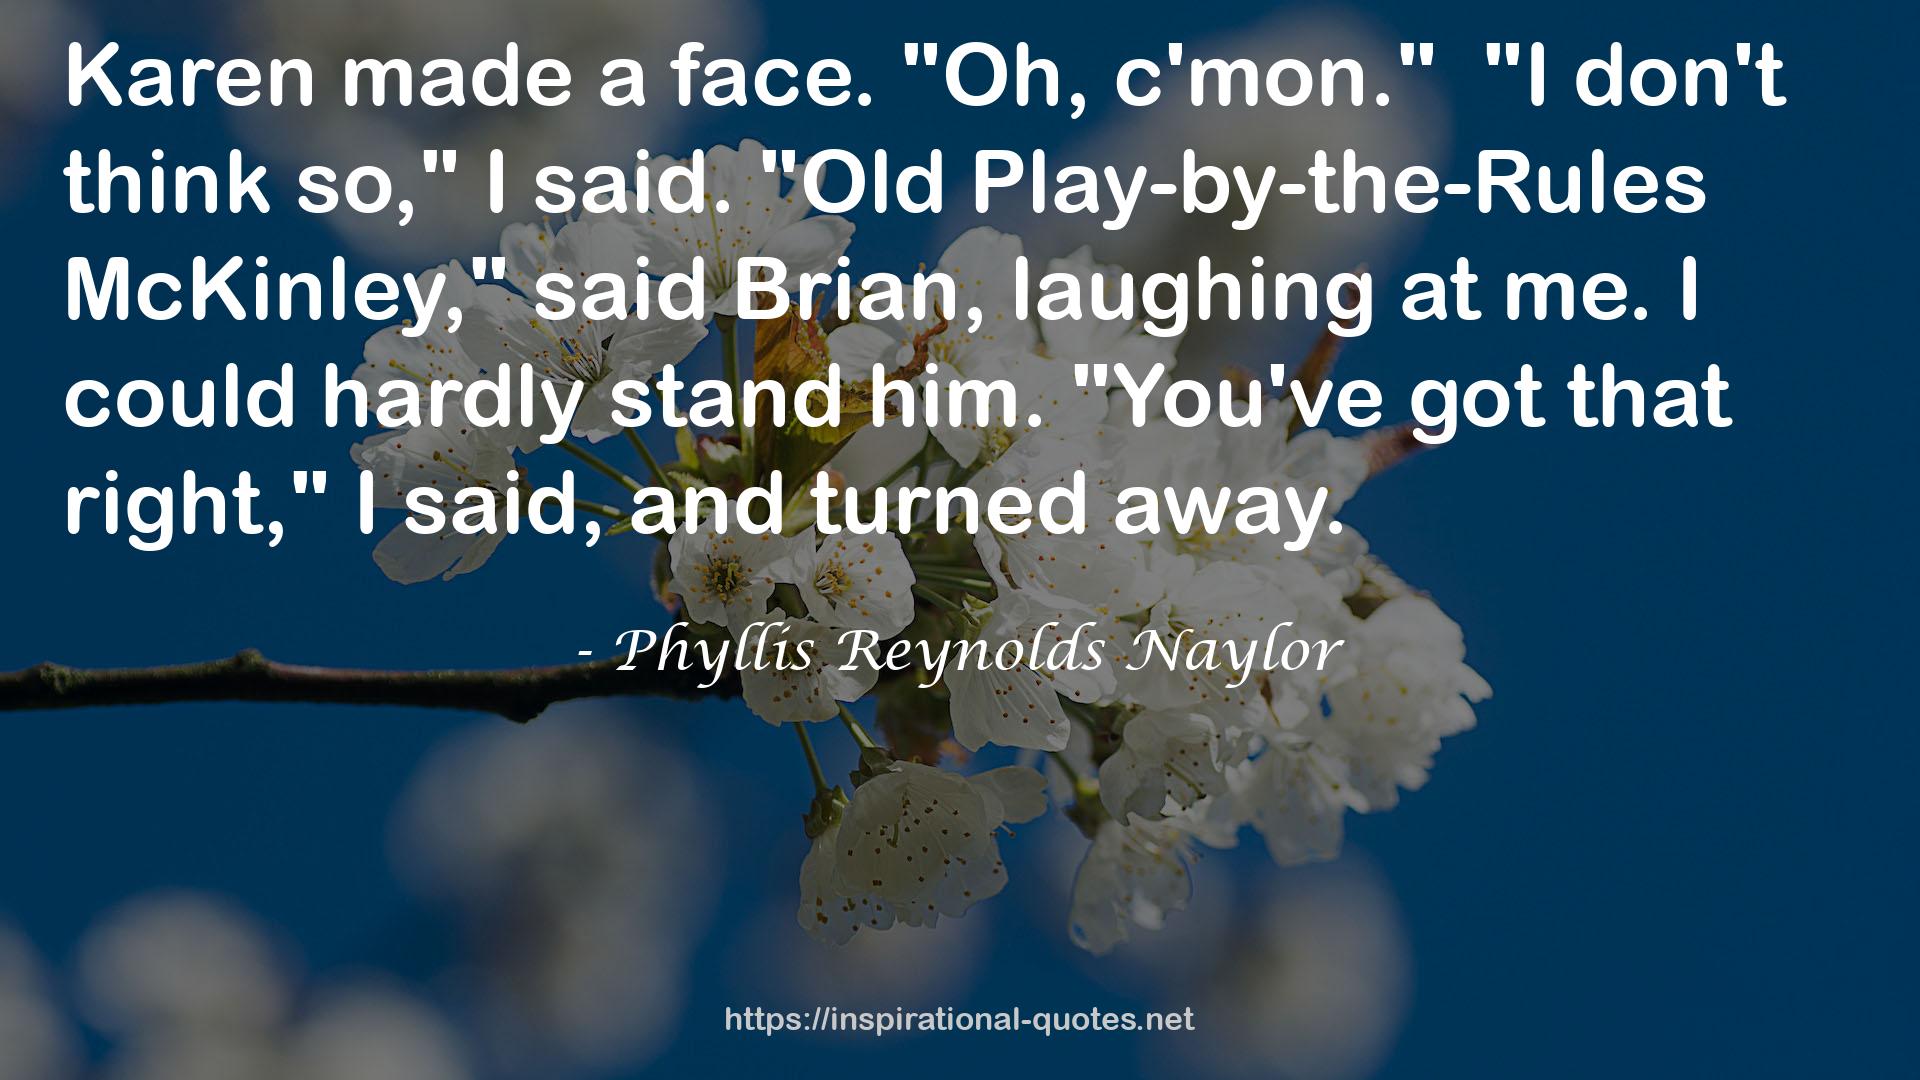 Phyllis Reynolds Naylor QUOTES